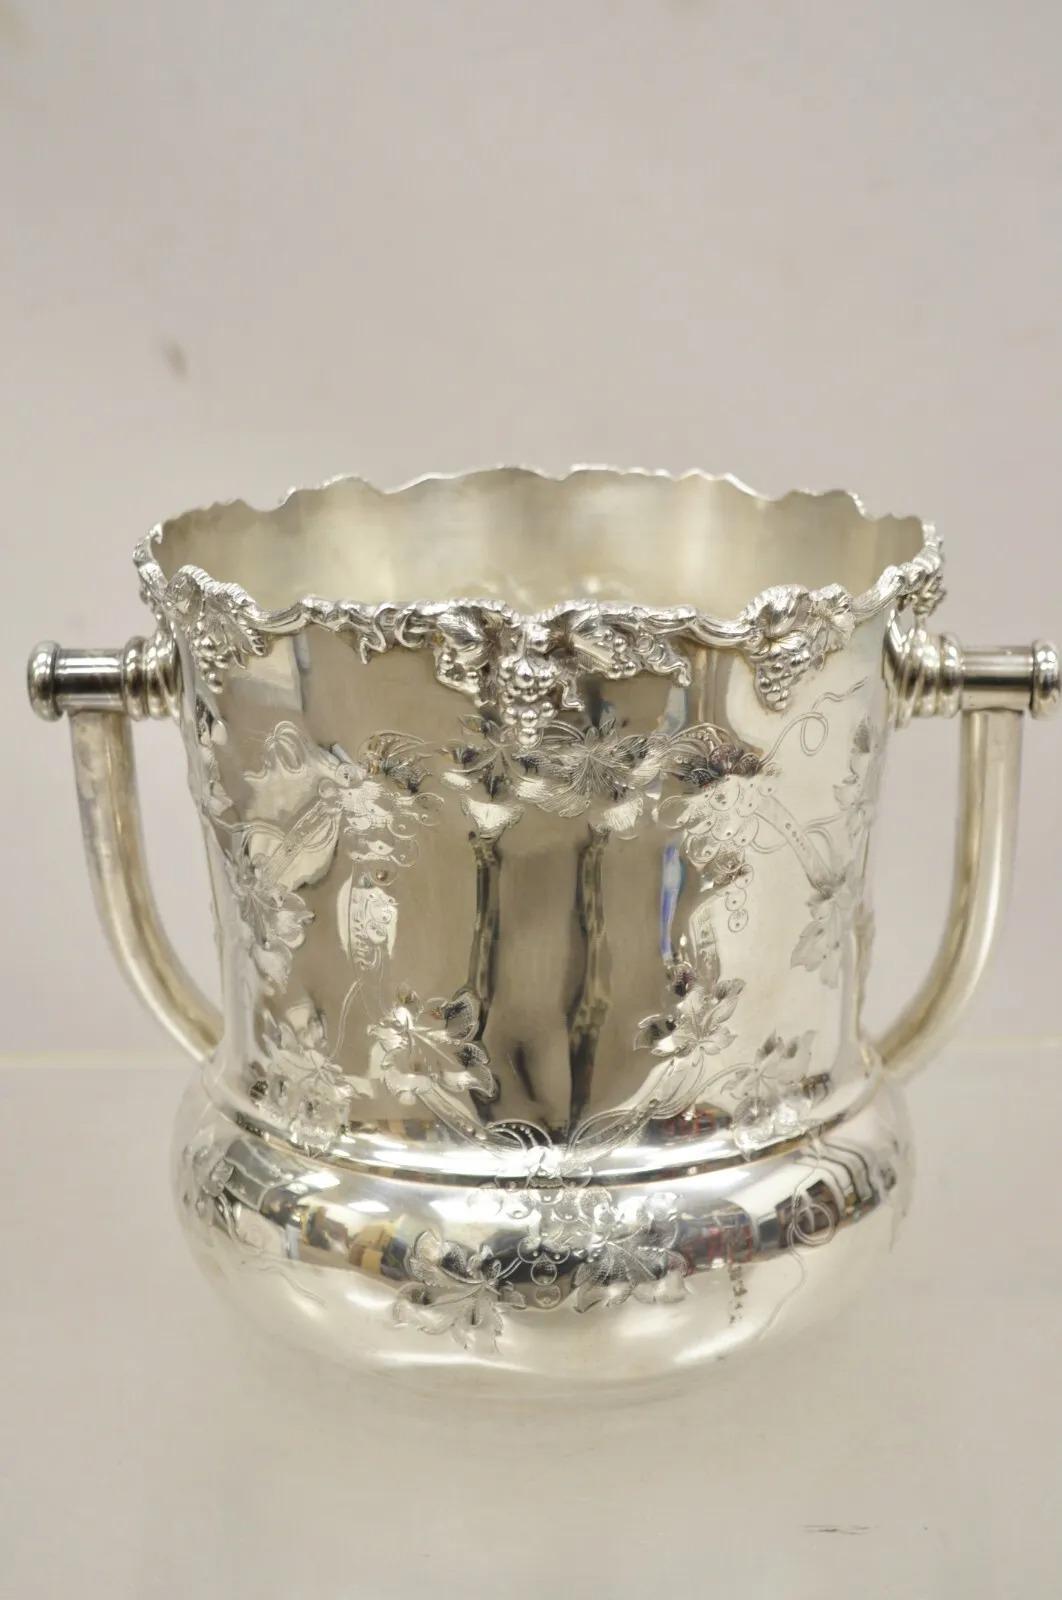 Antique BSCEP English Victorian Silver Plated  Grapevine Ice Bucket w Handle. Item features a reticulating handle, grapevine and wreath repousse throughout, shapely bulbous form, original hallmark, very nice champagne / wine chiller. Circa Early